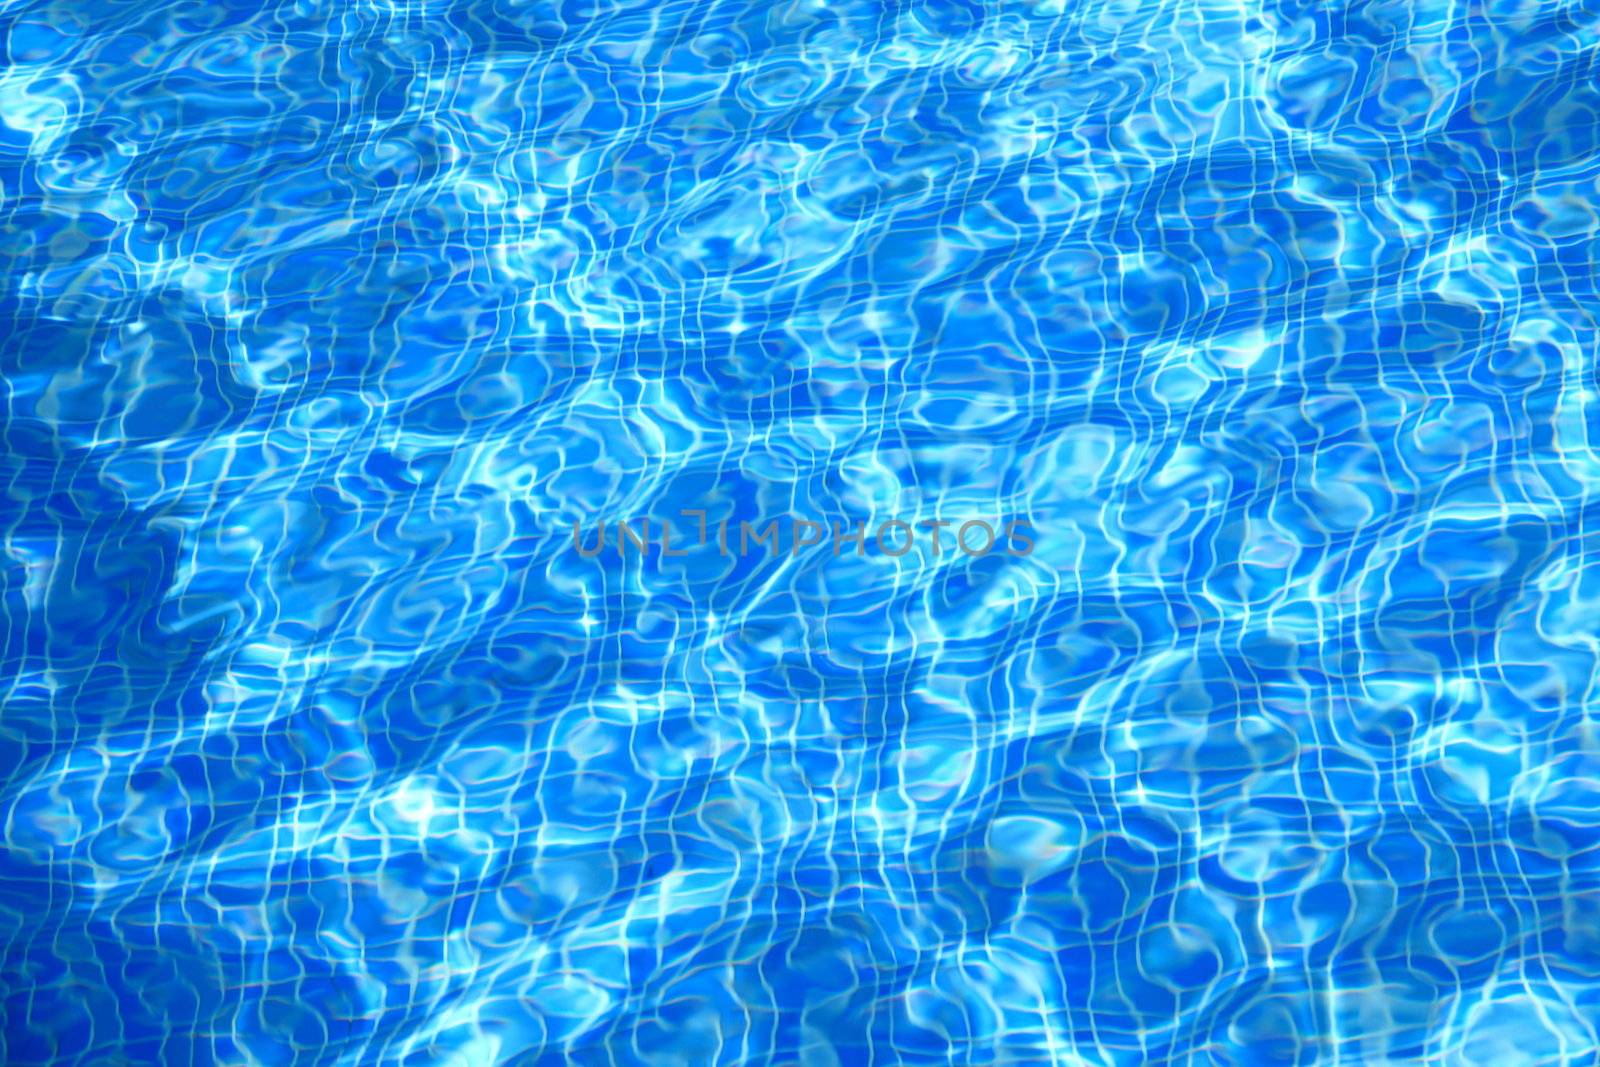 Pool water - blue background texture